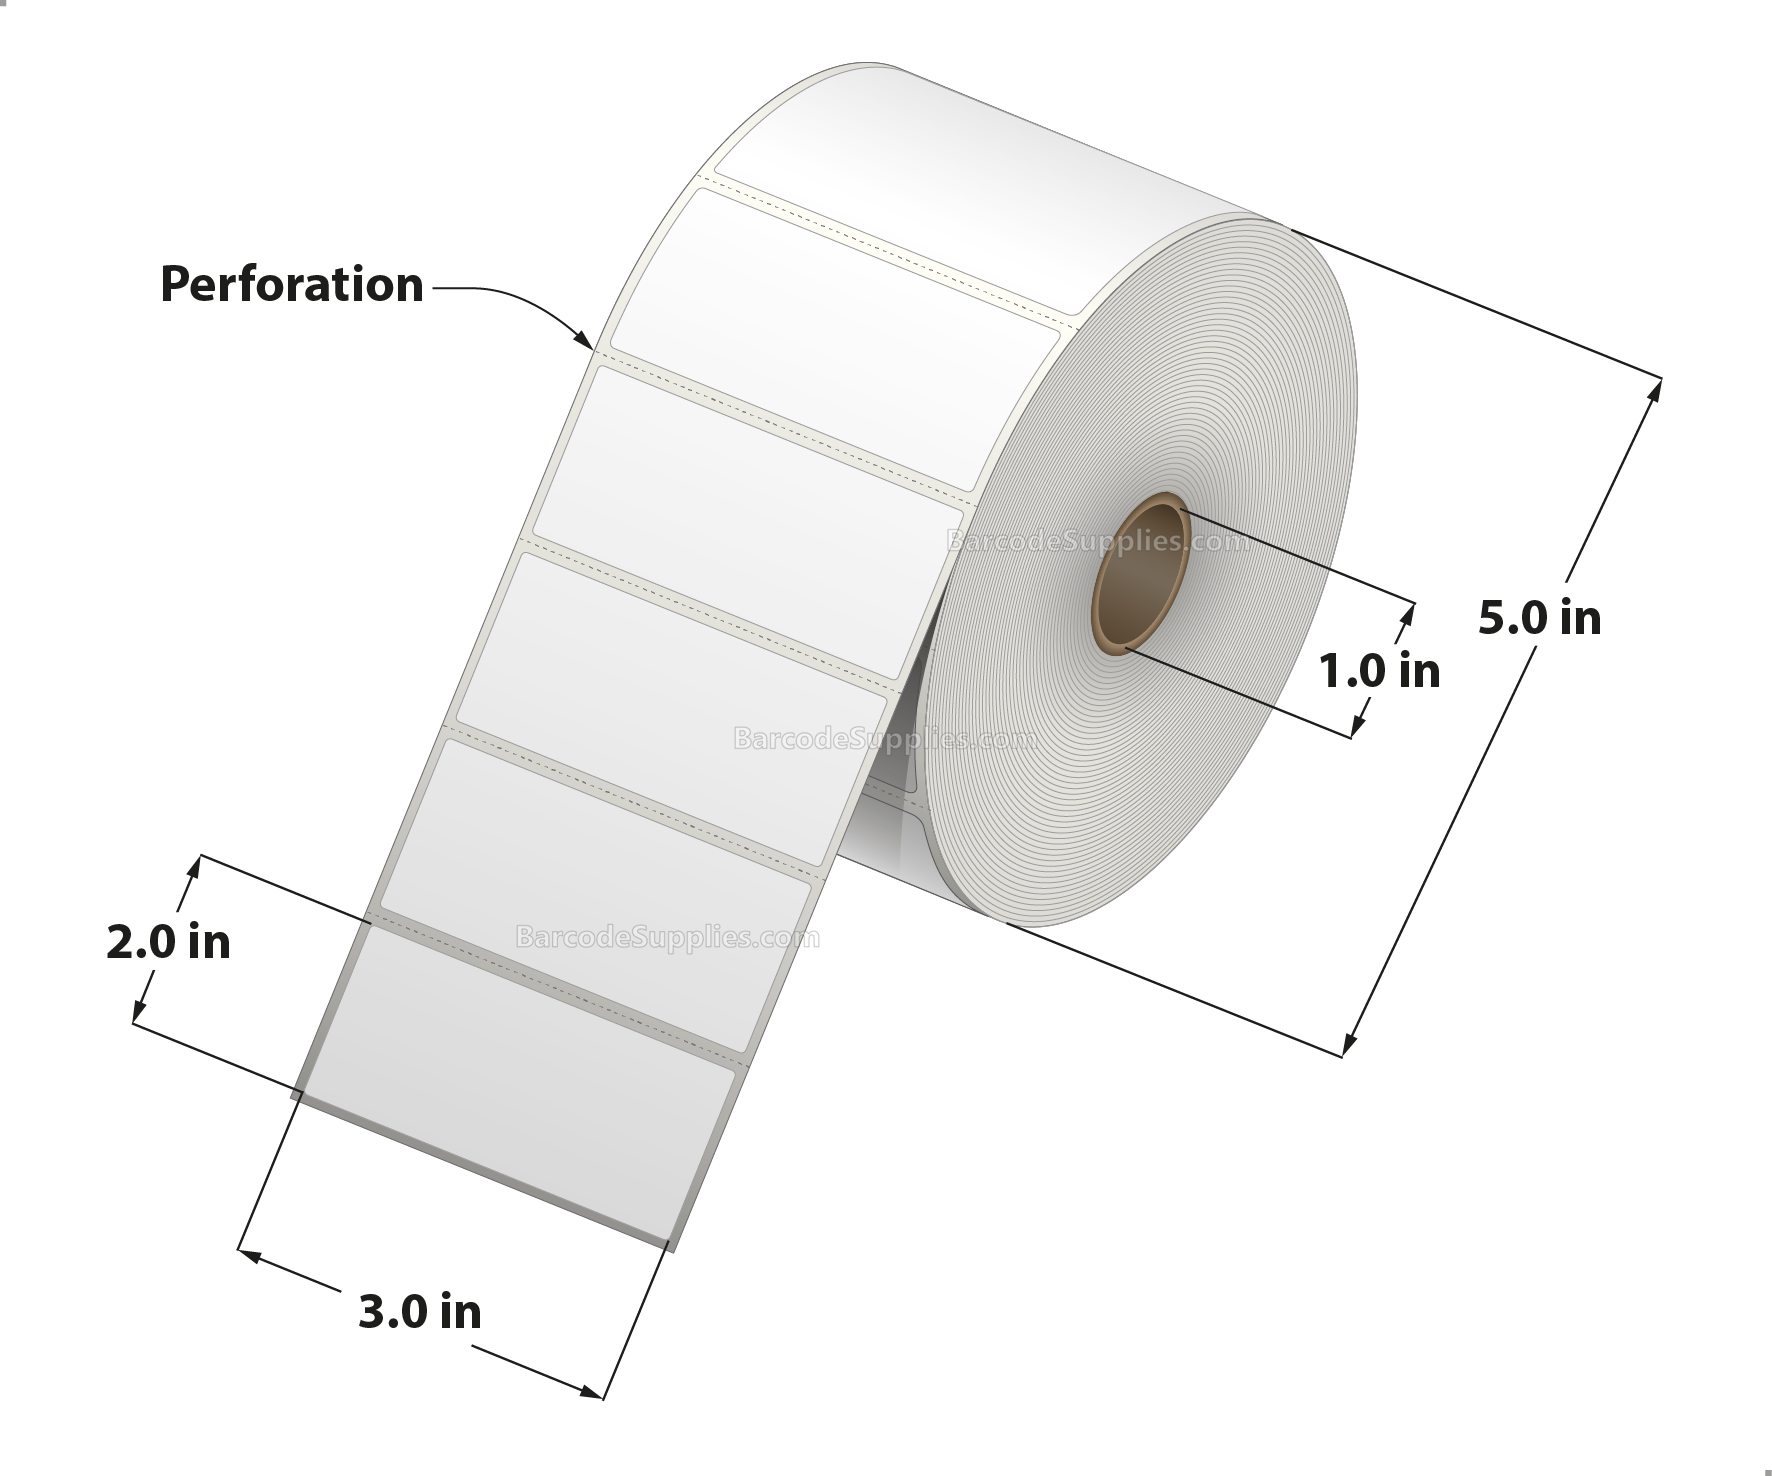 3 x 2 Direct Thermal White Labels With Permanent Acrylic Adhesive - Perforated - 1240 Labels Per Roll - Carton Of 4 Rolls - 4960 Labels Total - MPN: DT32-15PDT